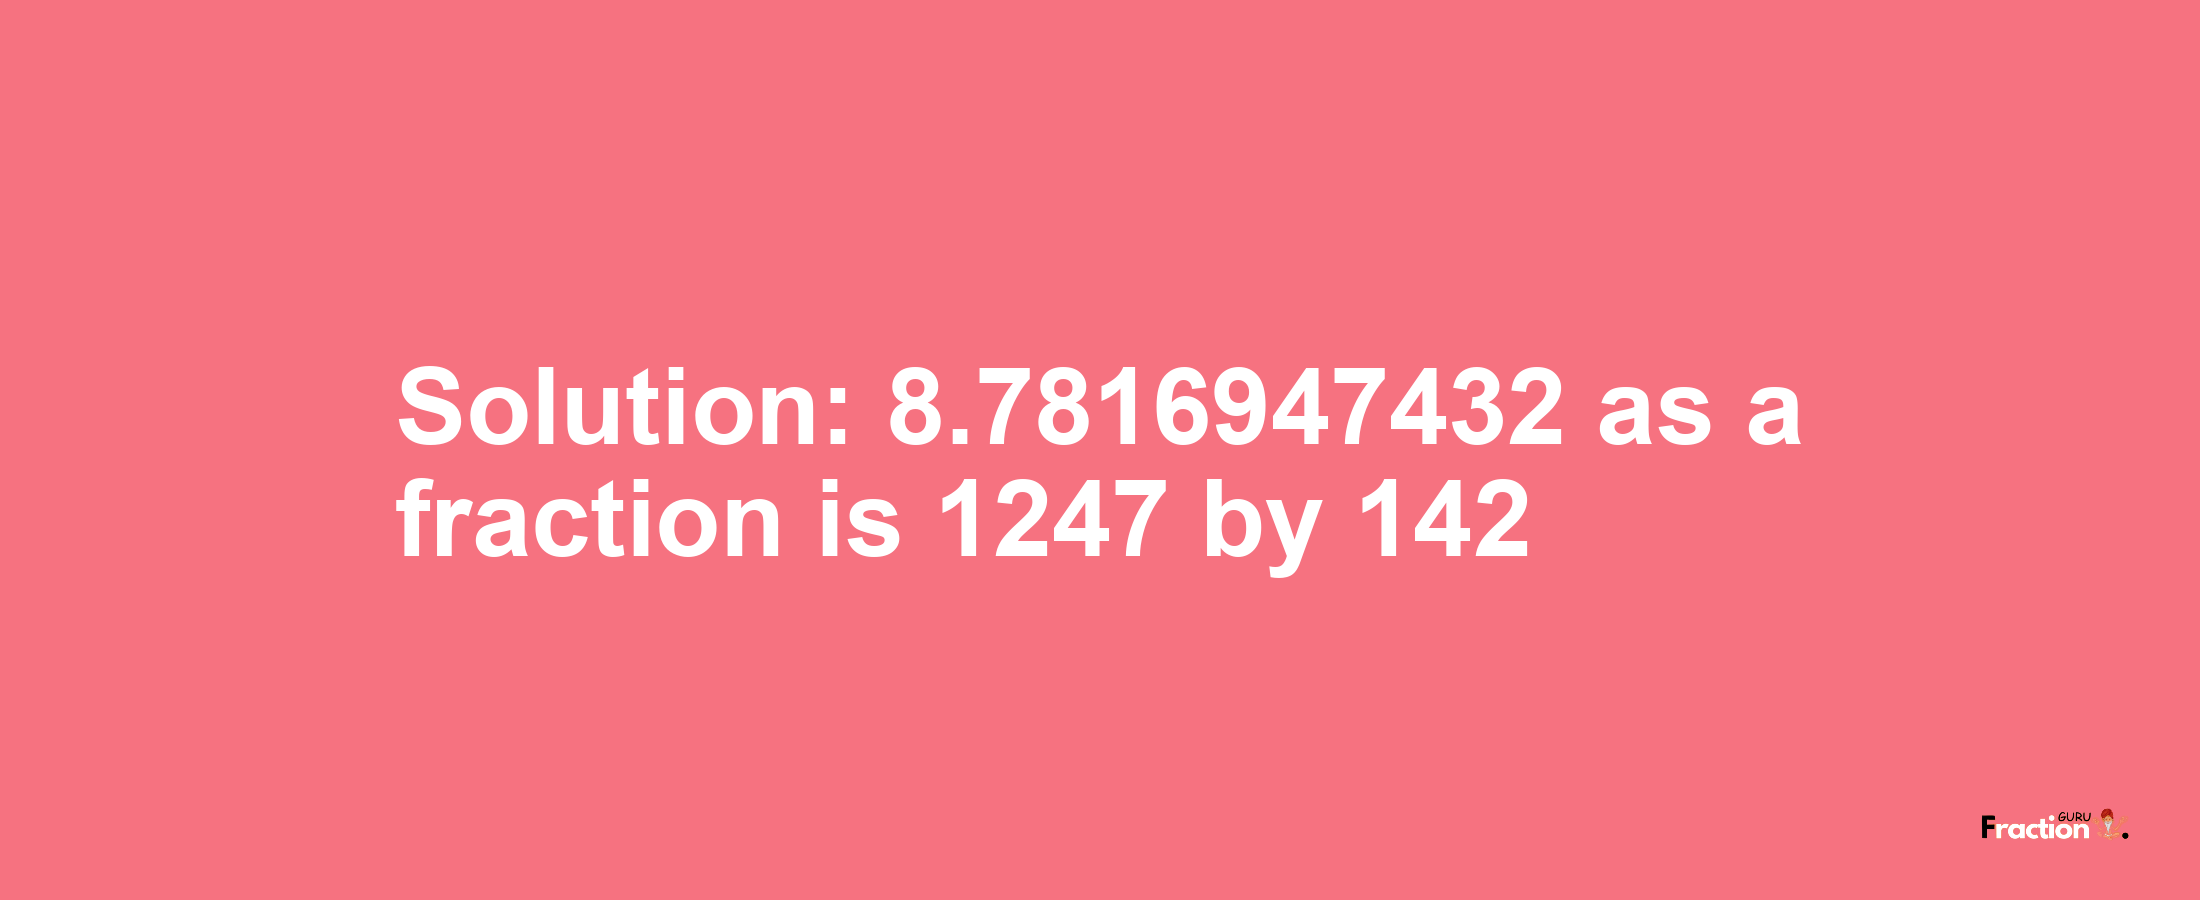 Solution:8.7816947432 as a fraction is 1247/142